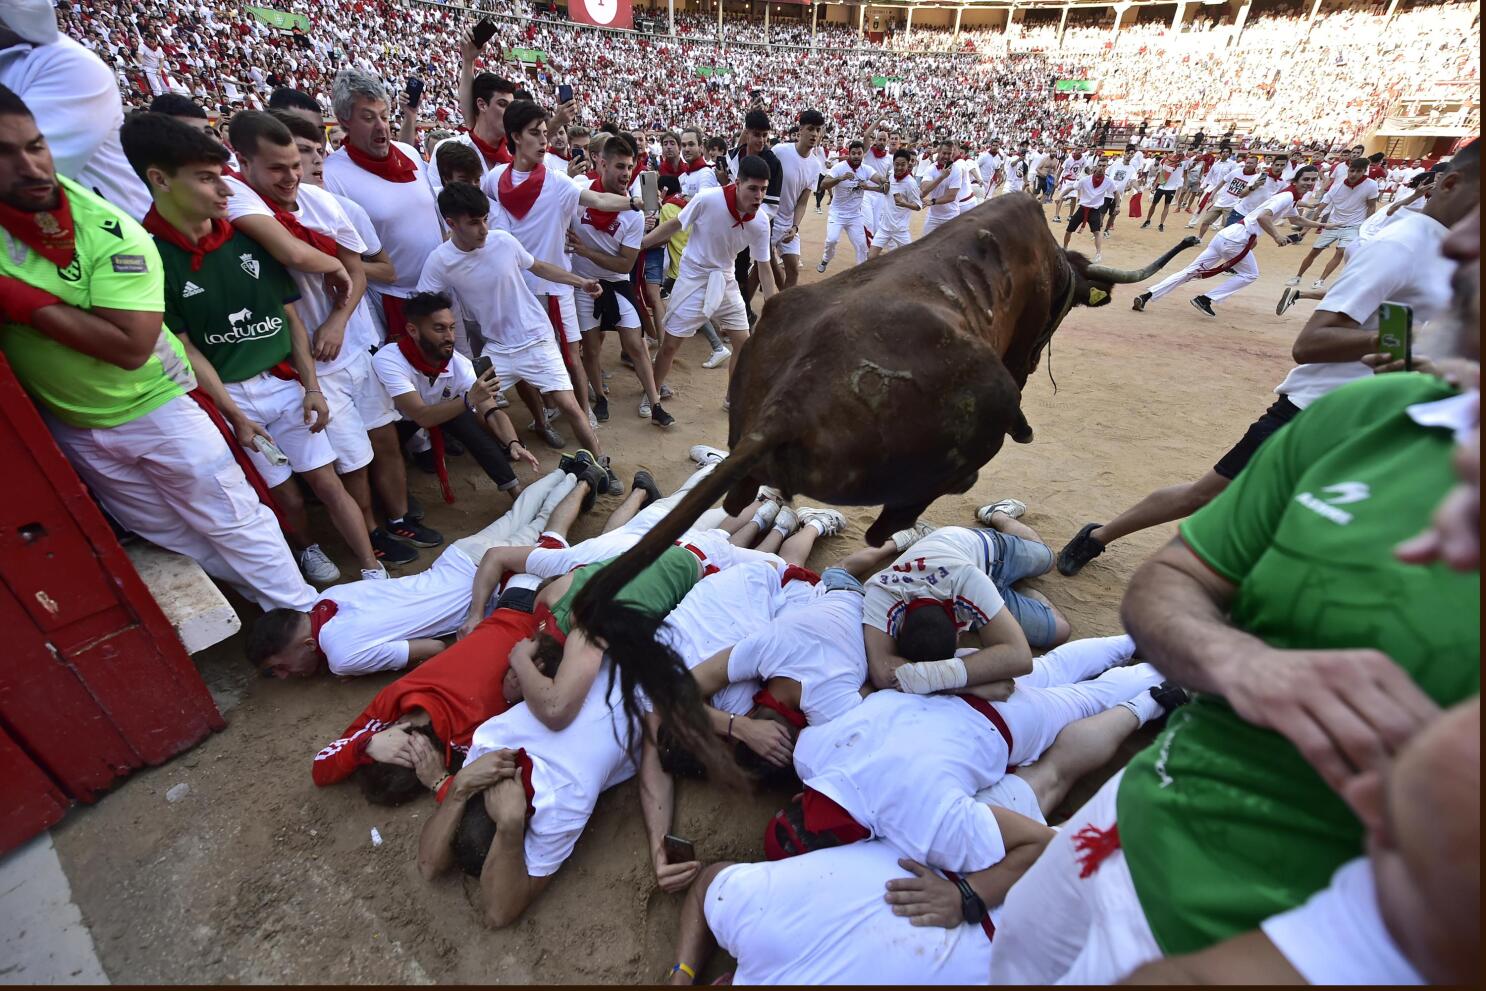 Pictured: Runners thrown into the air during Pamplona bull festival